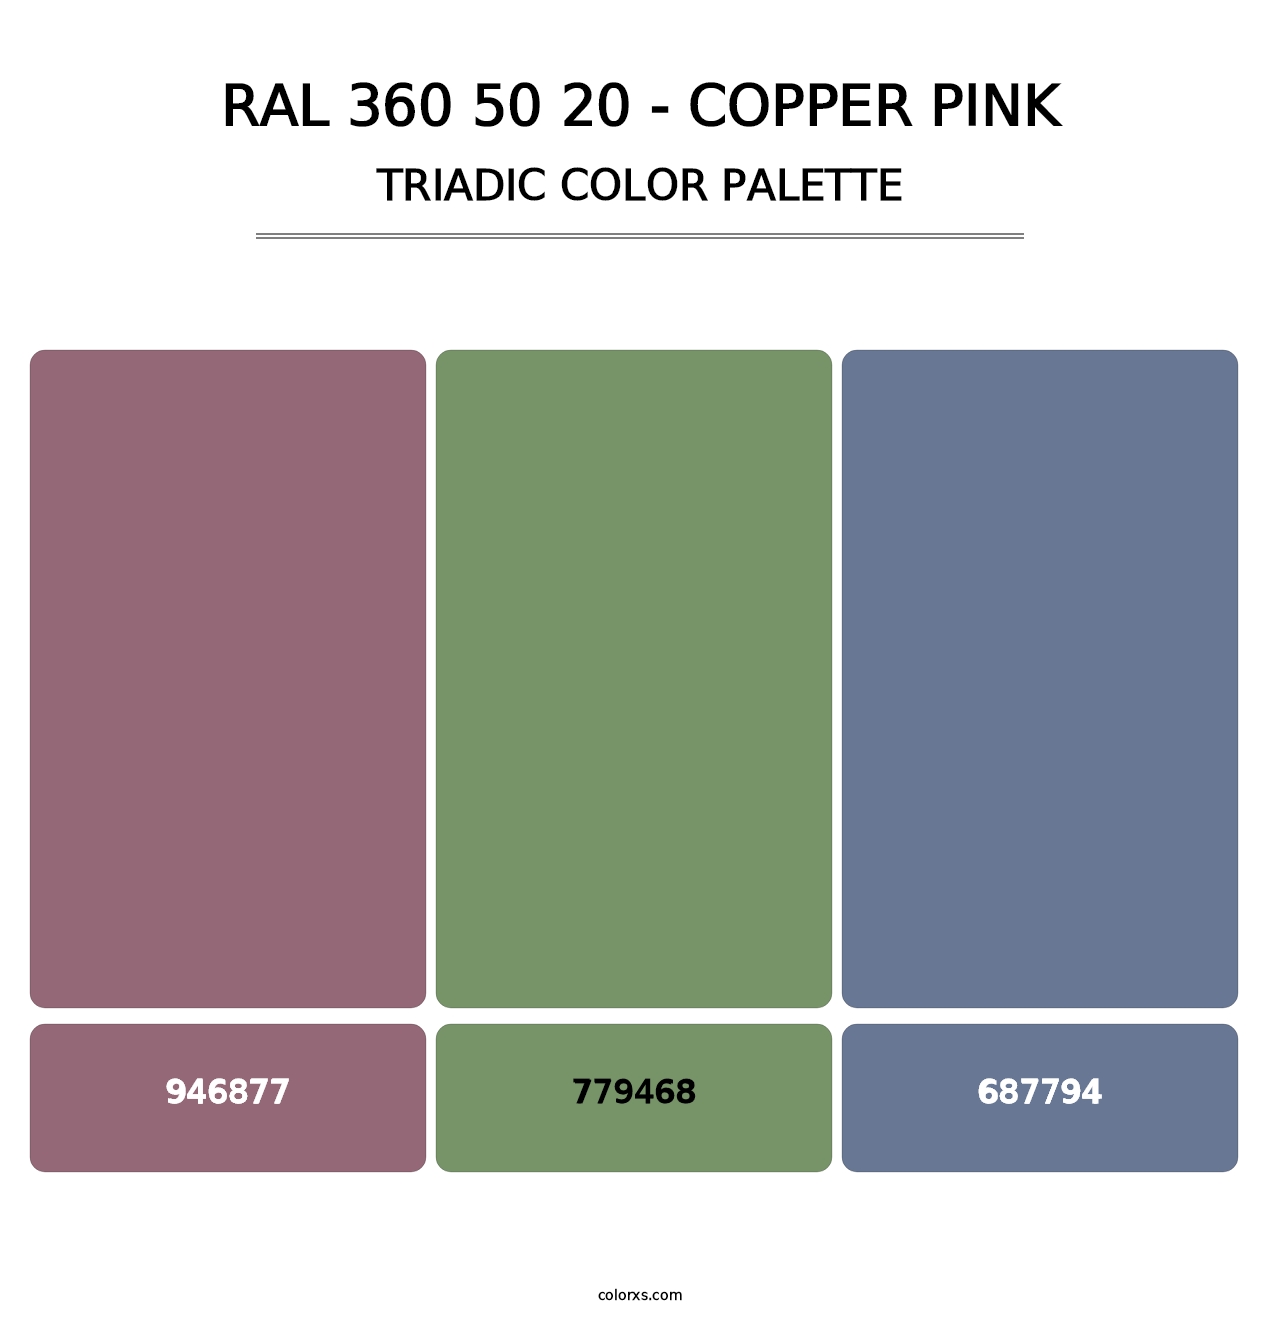 RAL 360 50 20 - Copper Pink - Triadic Color Palette